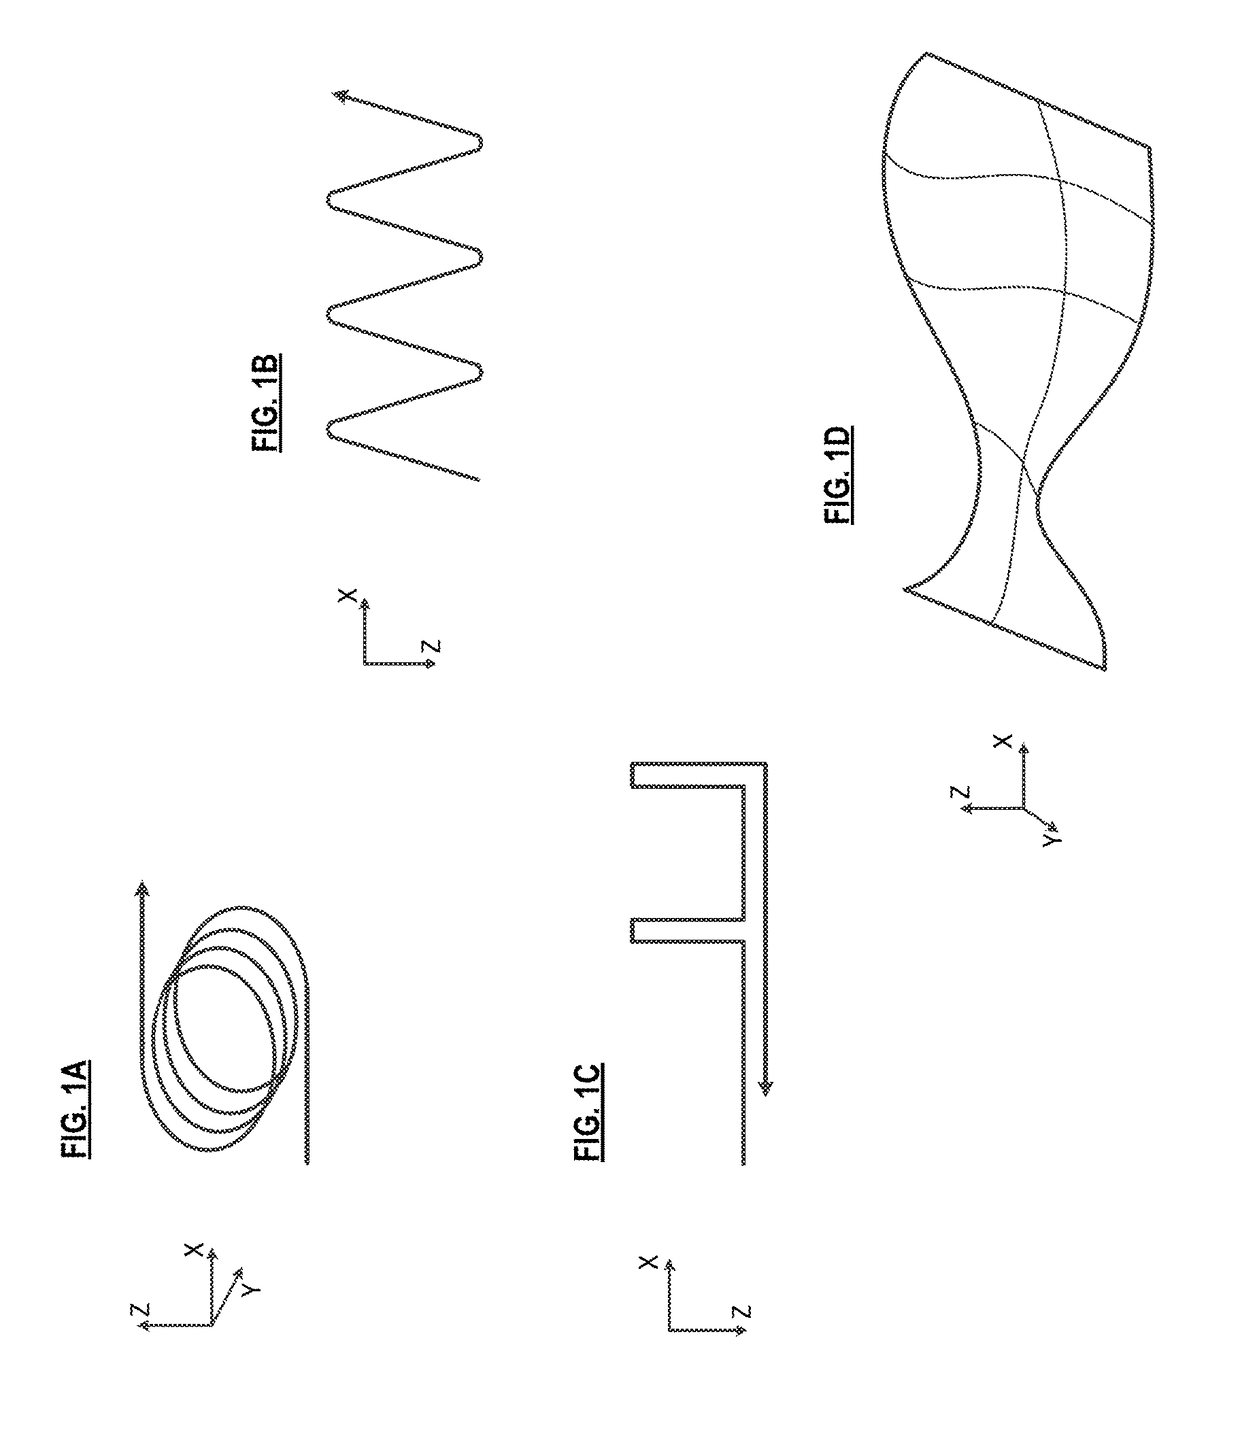 Method for additive manufacturing using filament shaping